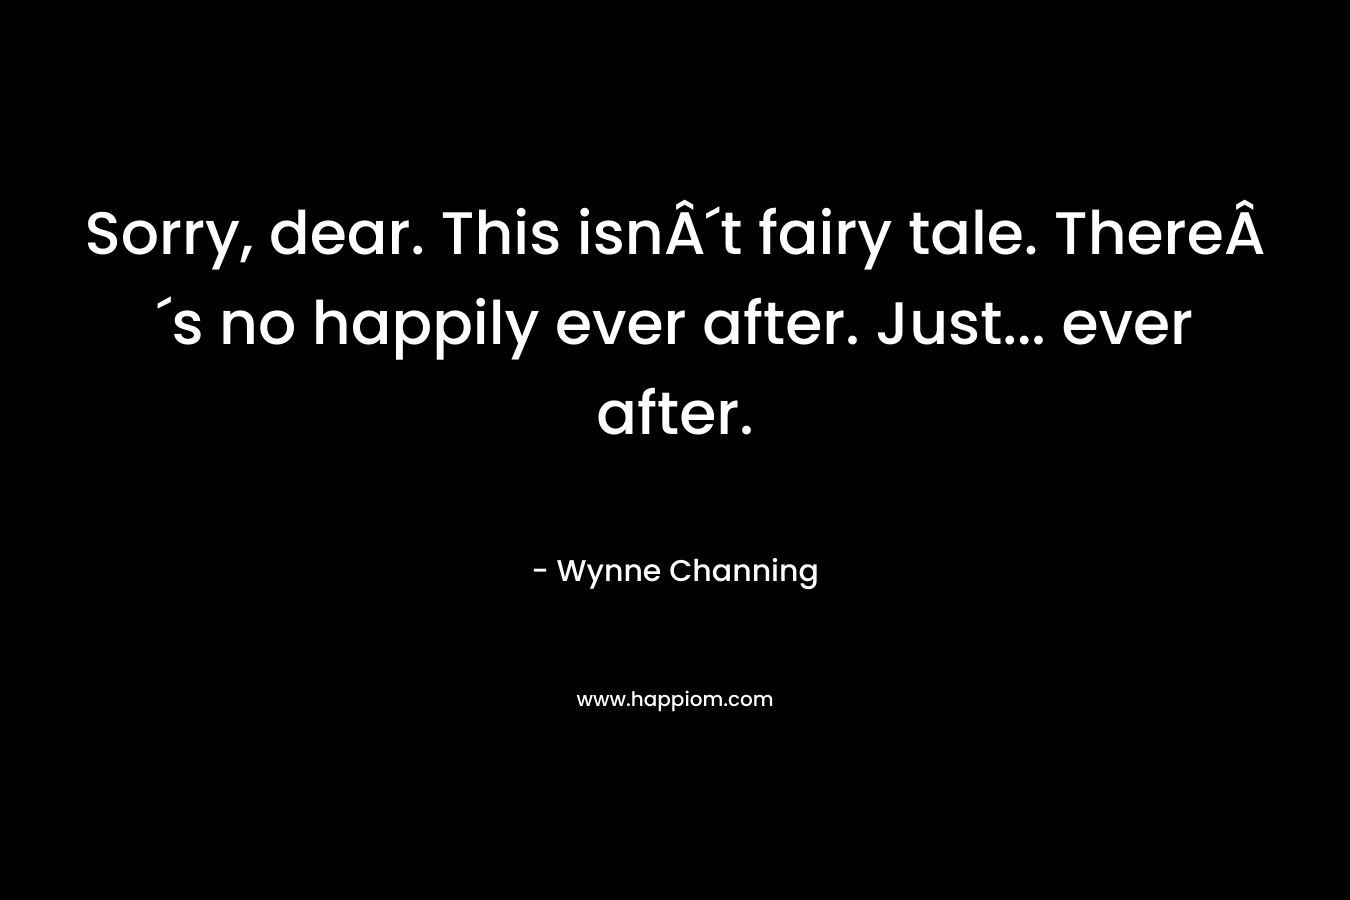 Sorry, dear. This isnÂ´t fairy tale. ThereÂ´s no happily ever after. Just... ever after.